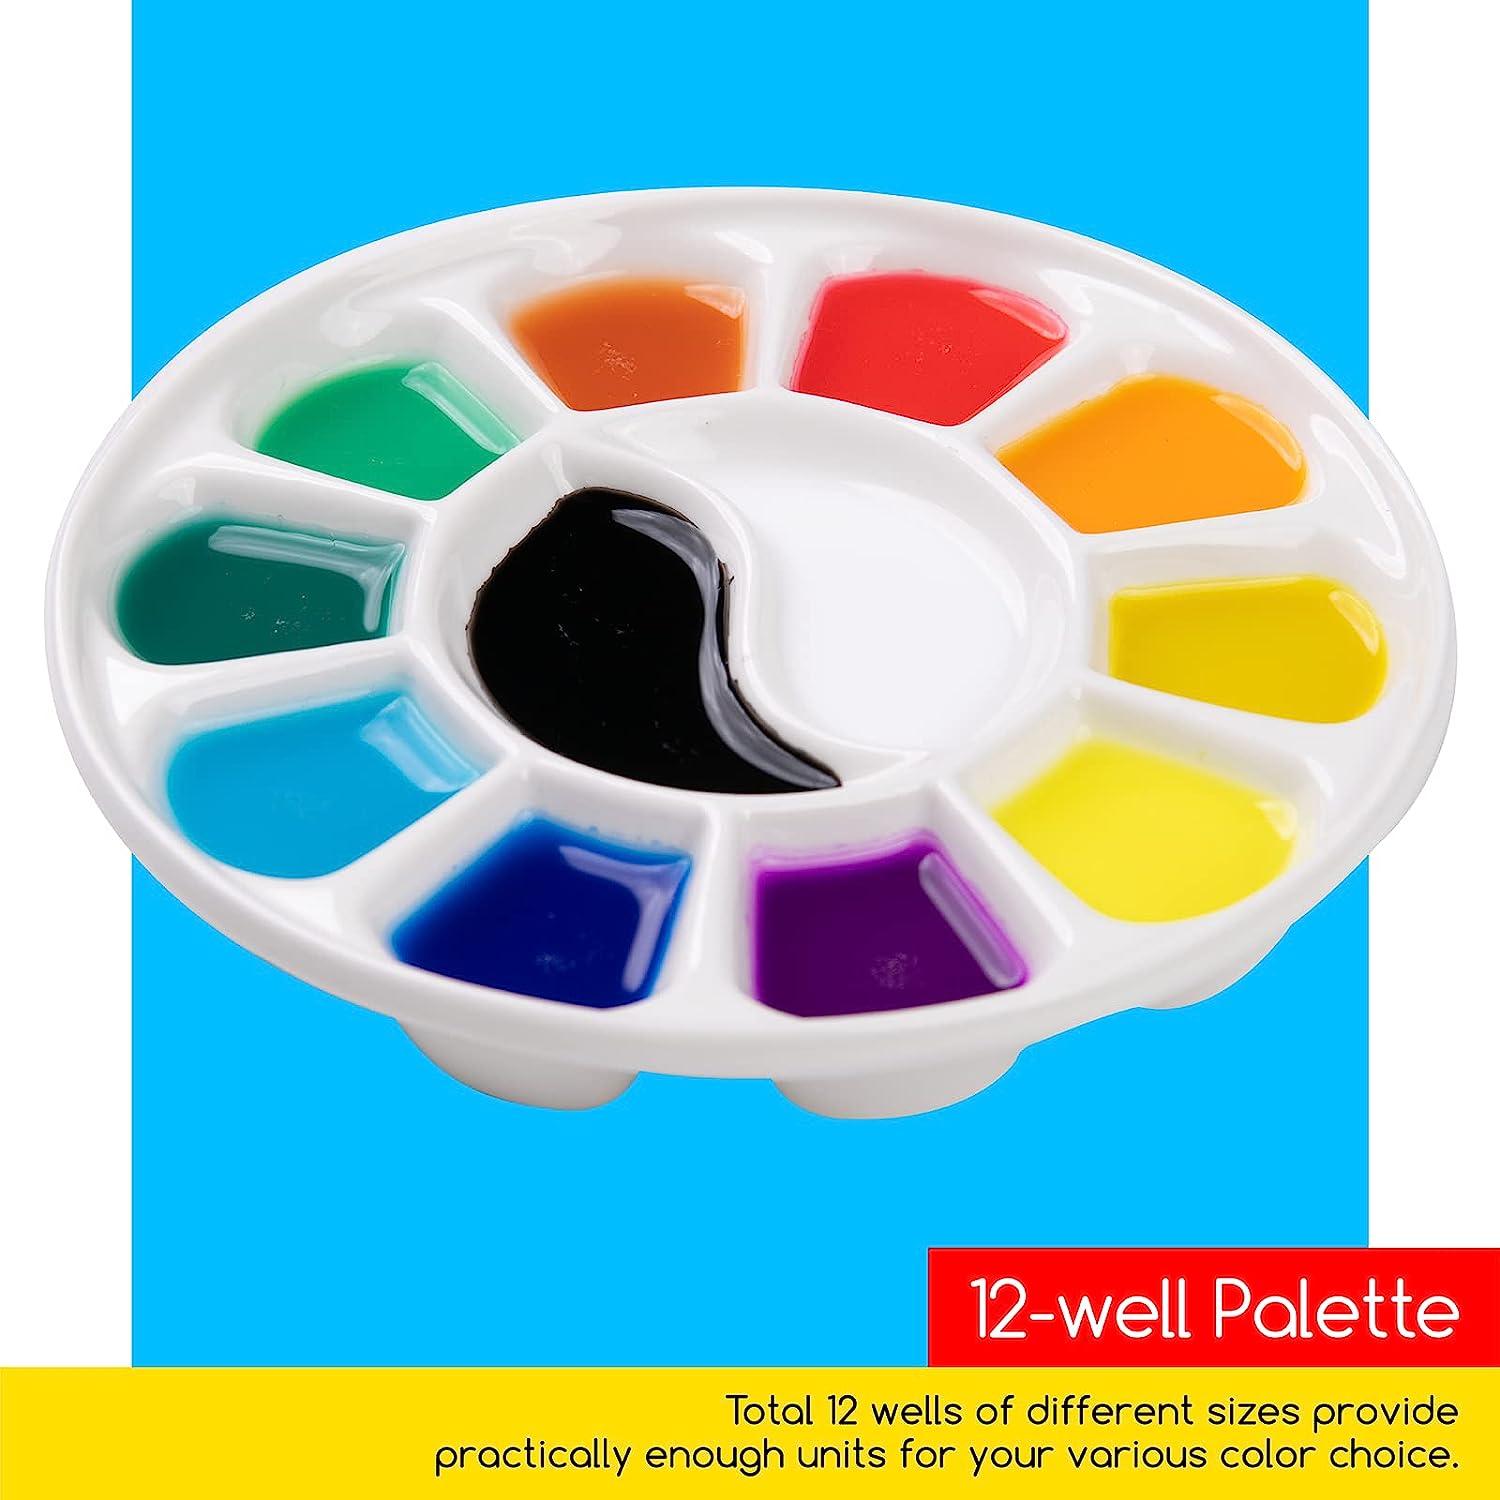 MEEDEN 9 Well Round Ceramic Paint Palette, Porcelain Watercolor Palette, Artist Paint Mixing Palette Tray in Art Craft Supplies, White